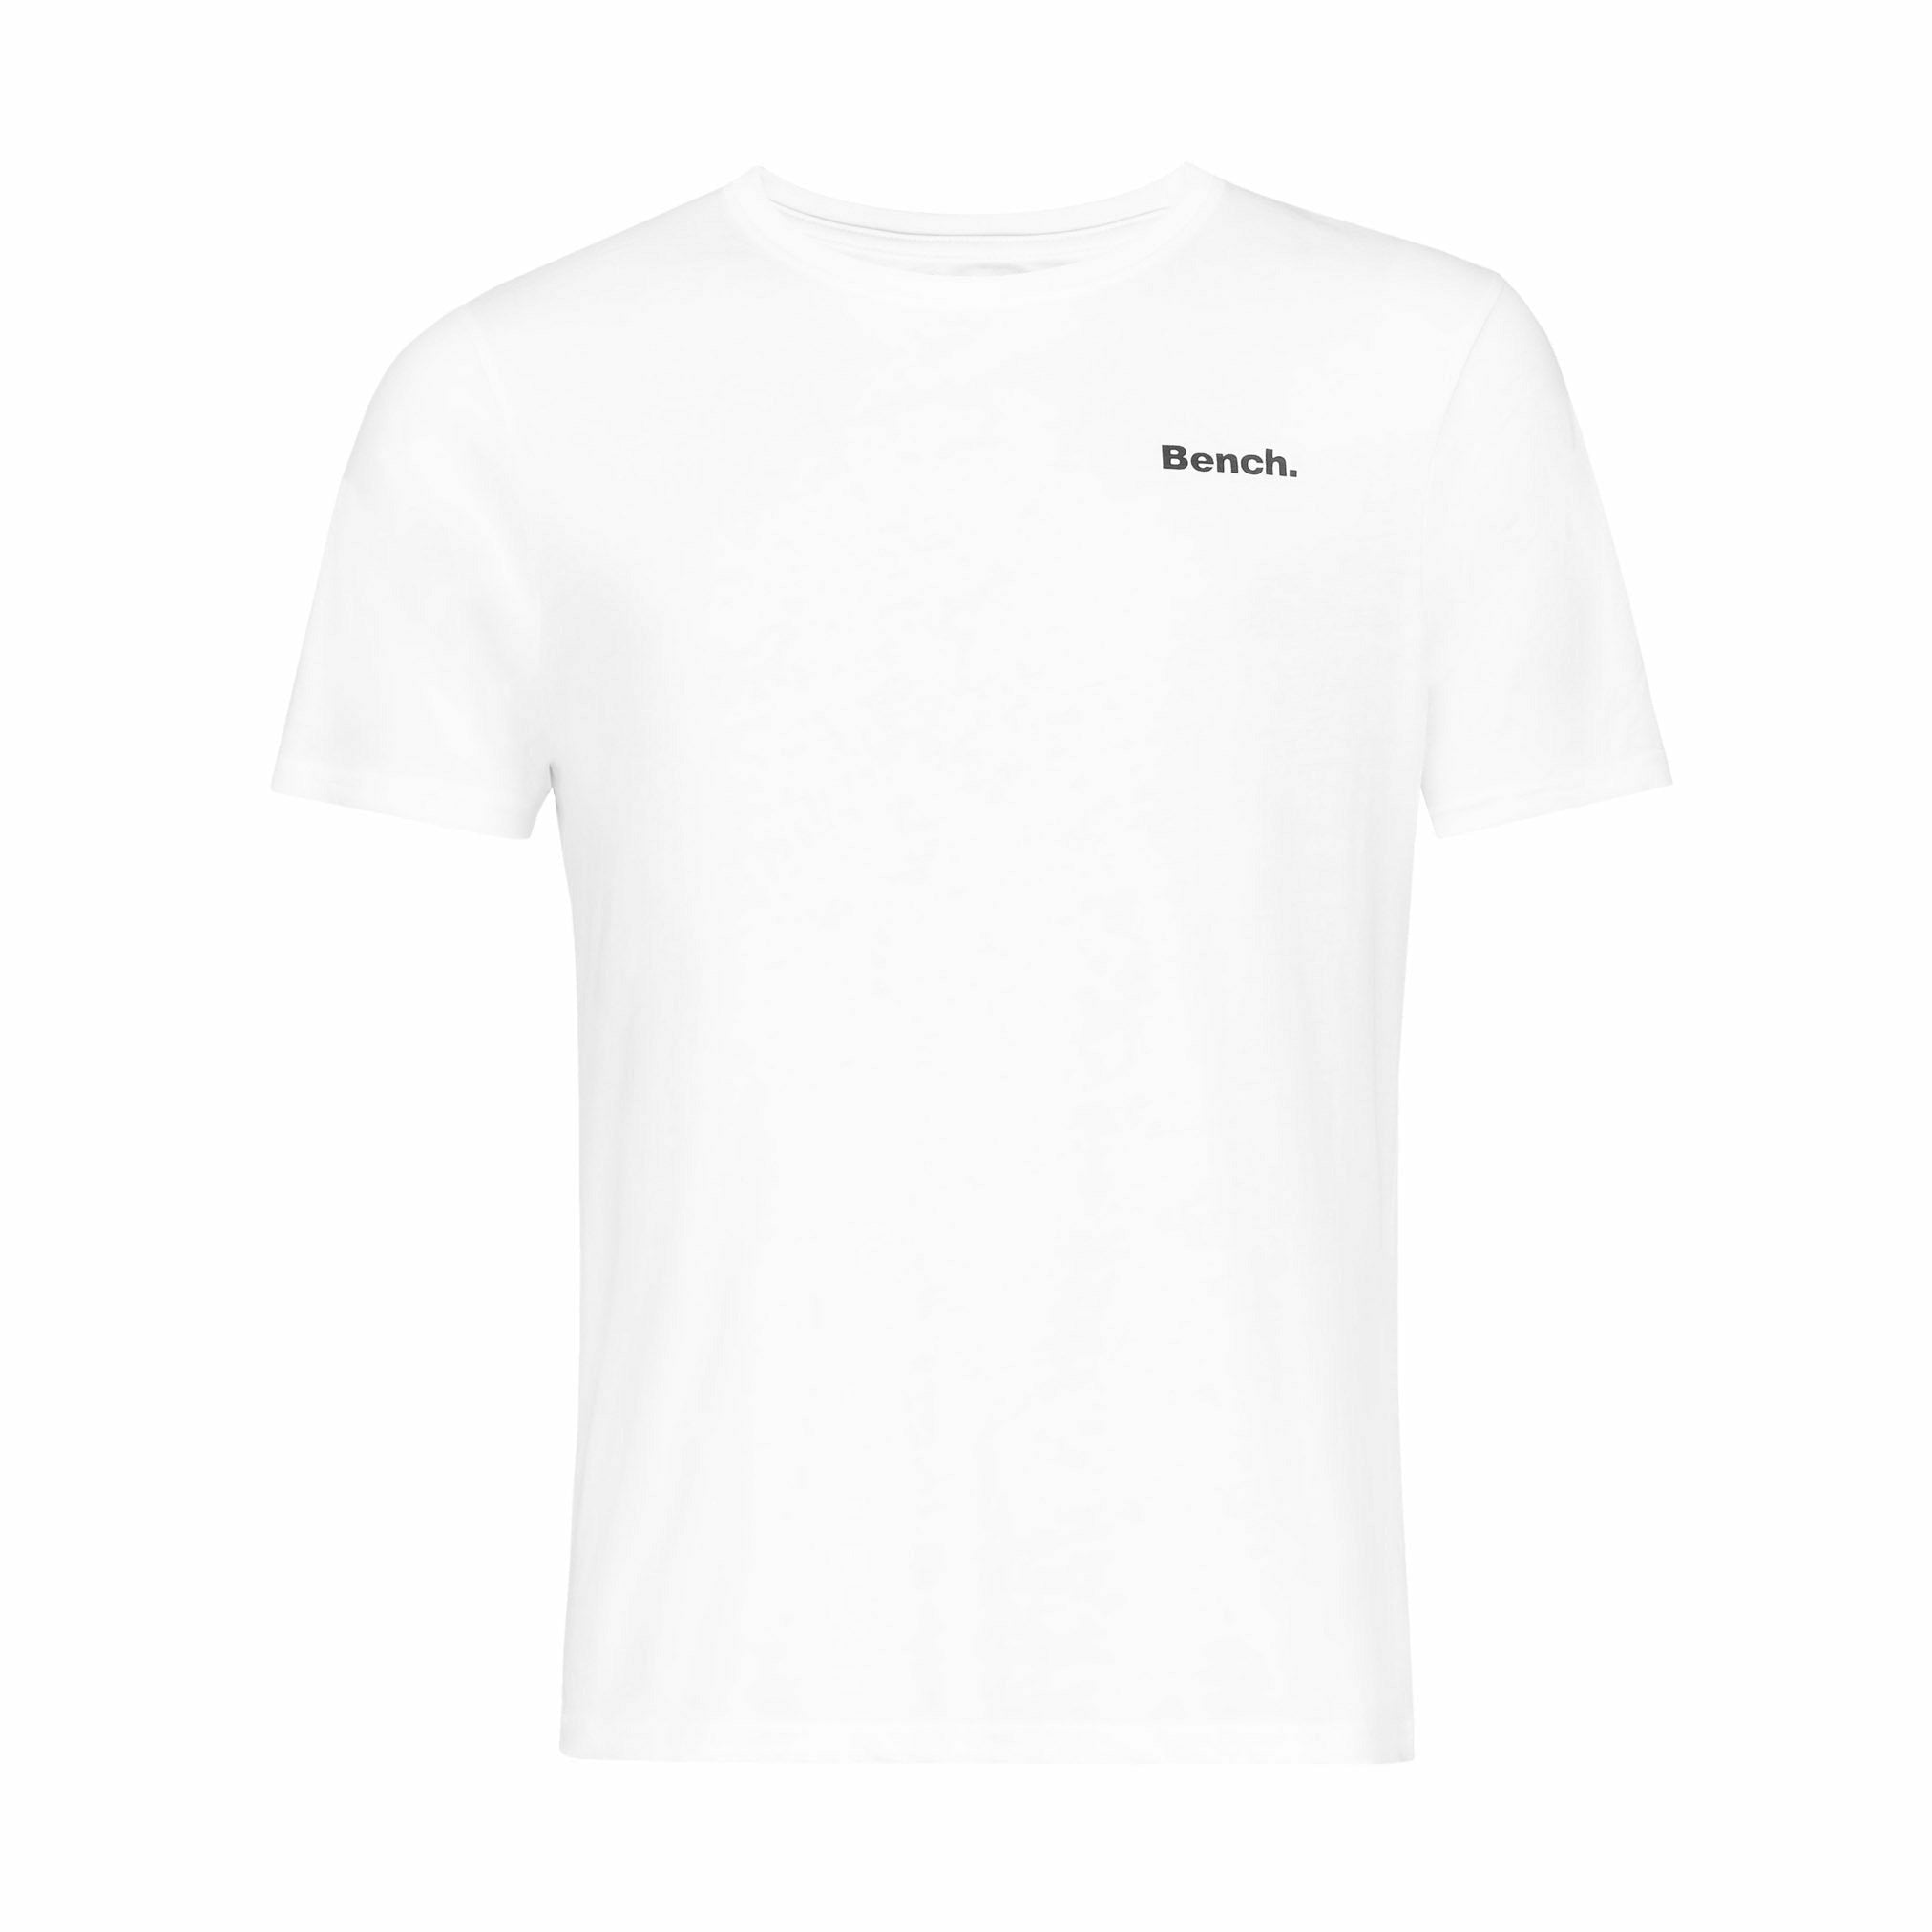 Shop - Mens 'OLIVER' T-Shirt 5 Pack - CORE ESSENTIAL PACK | Bench.co.uk ...